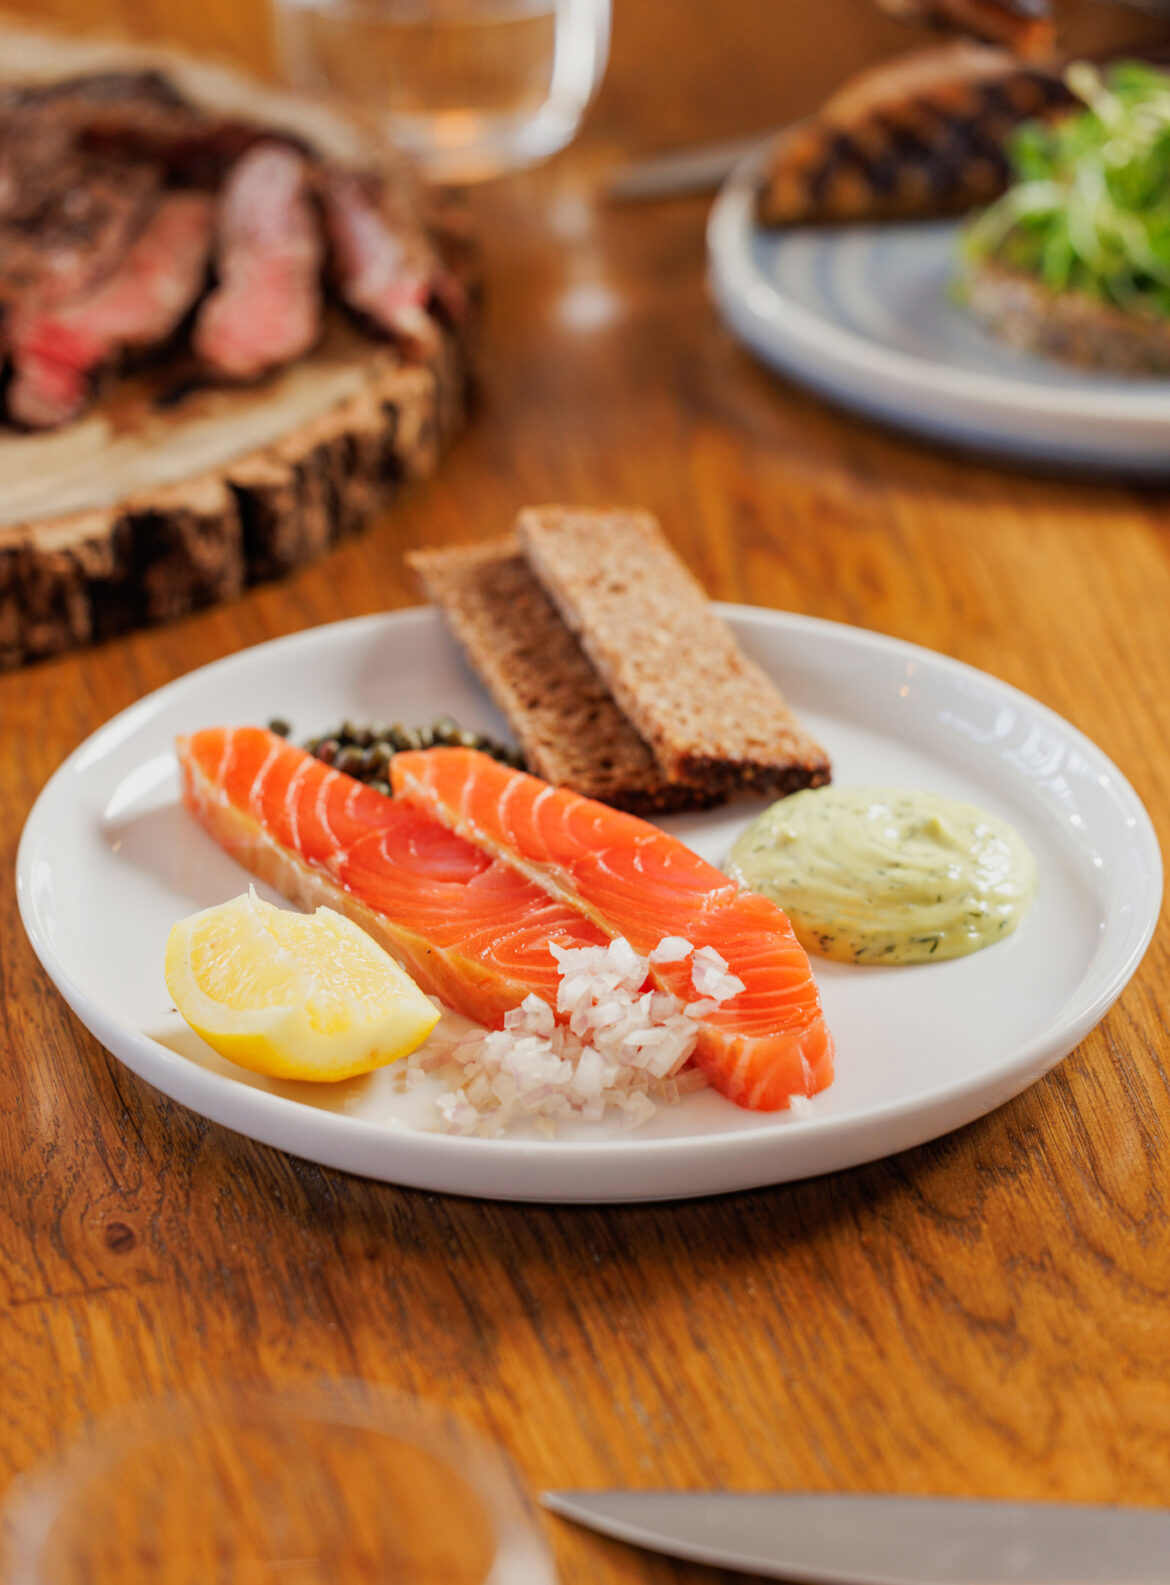 A plate of food on a table: smoked salmon, rye bread, a wedge of lemon and finely chopped shallots